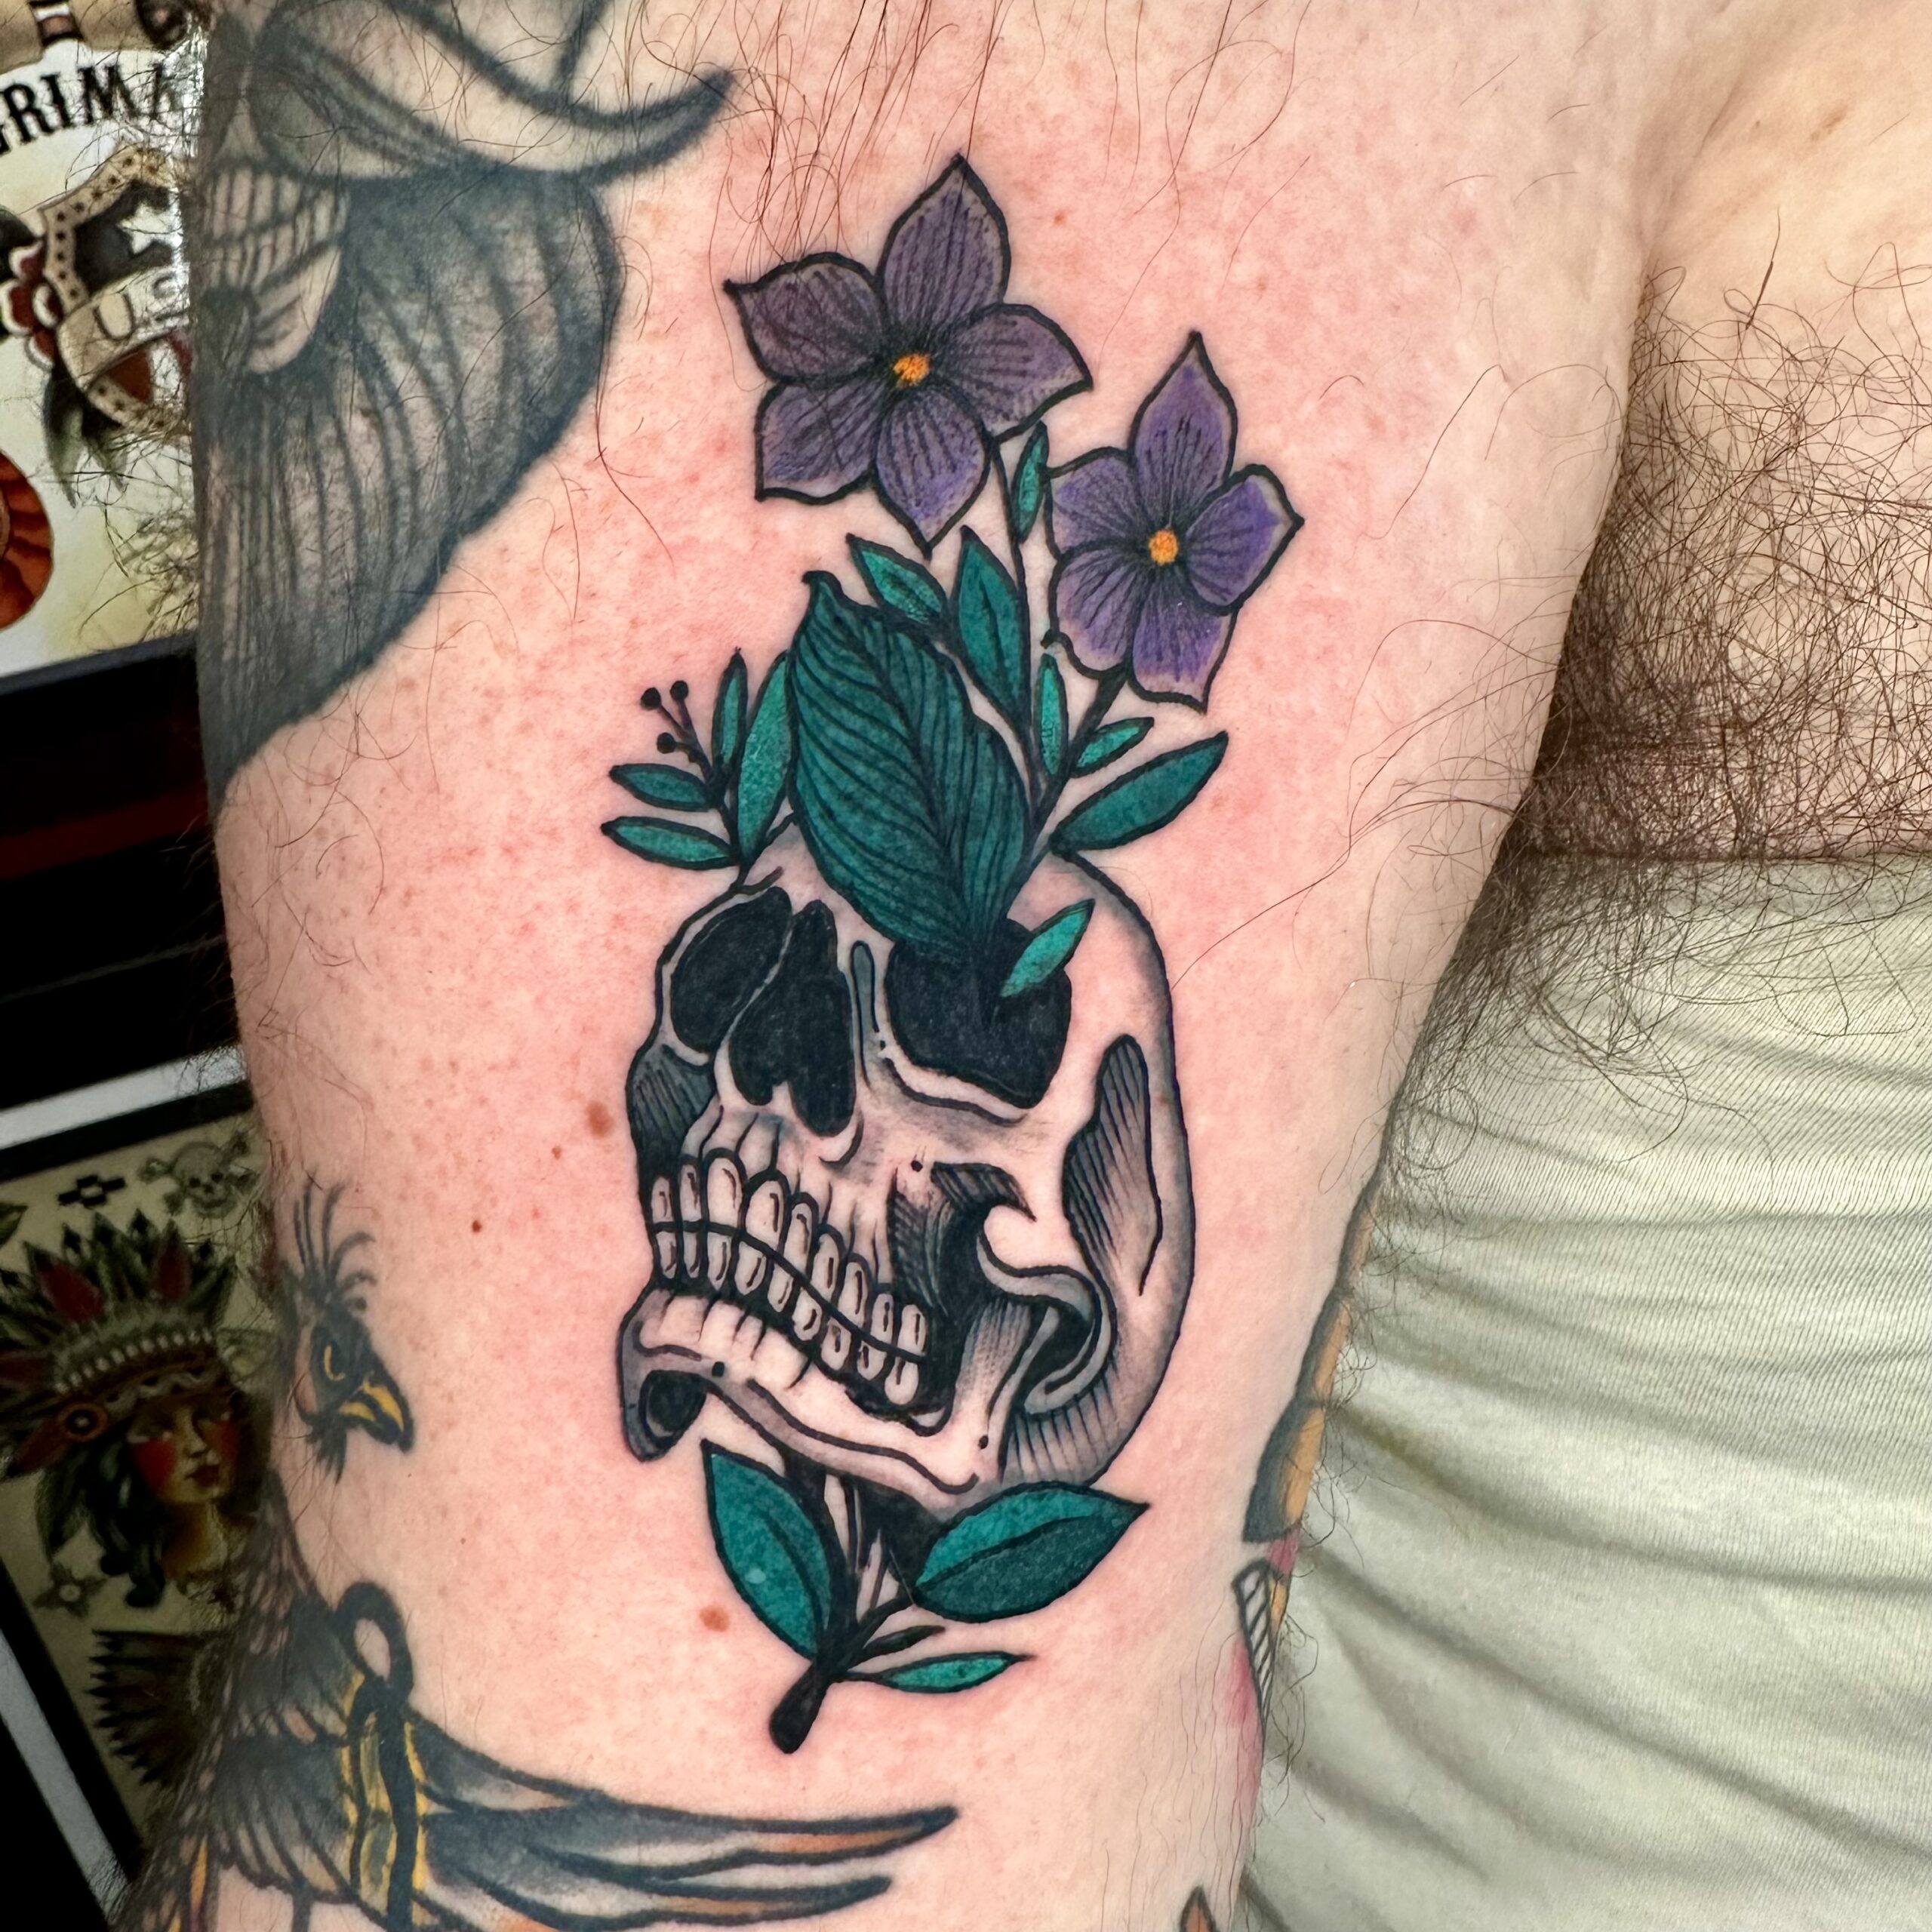 Skull tattoo with flowers